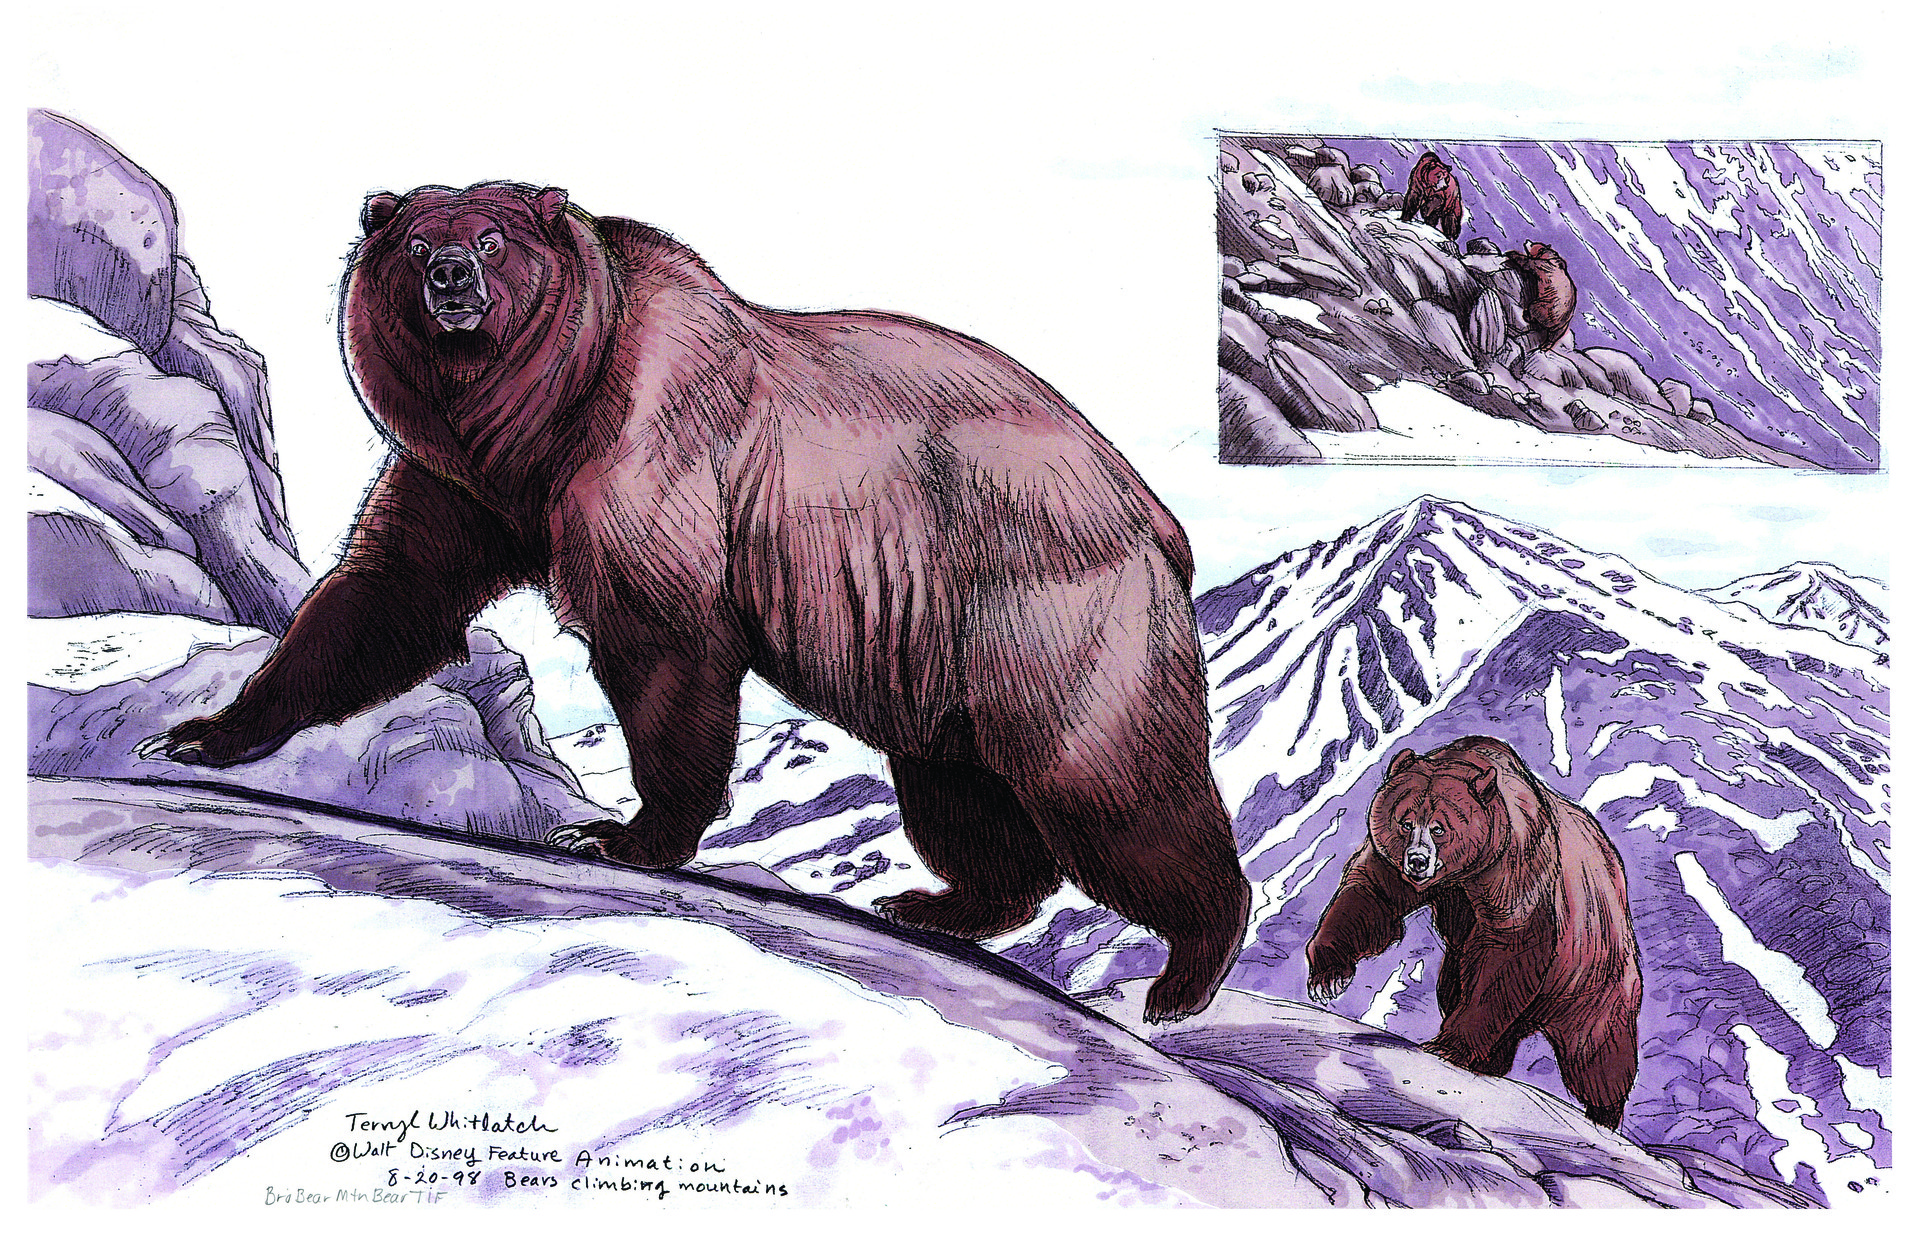 Concept art for Disney's animated feature Brother Bear.